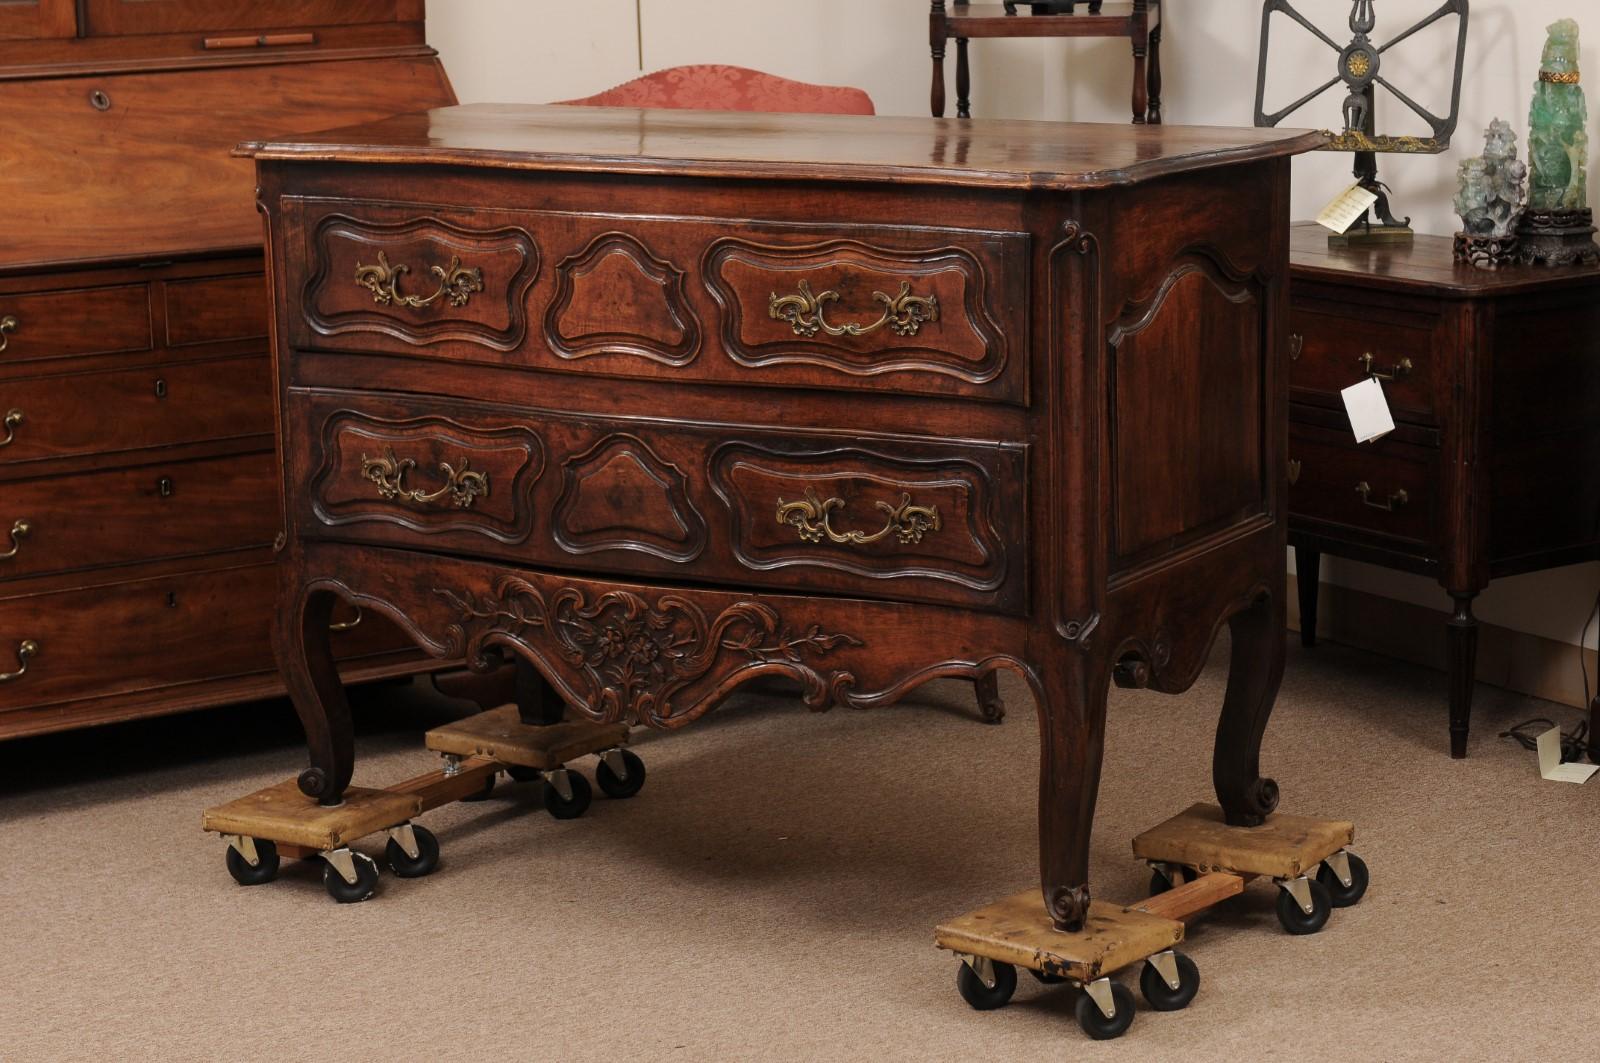  French Mid 18th Century Louis XV Walnut Commode with 2 Drawers For Sale 11